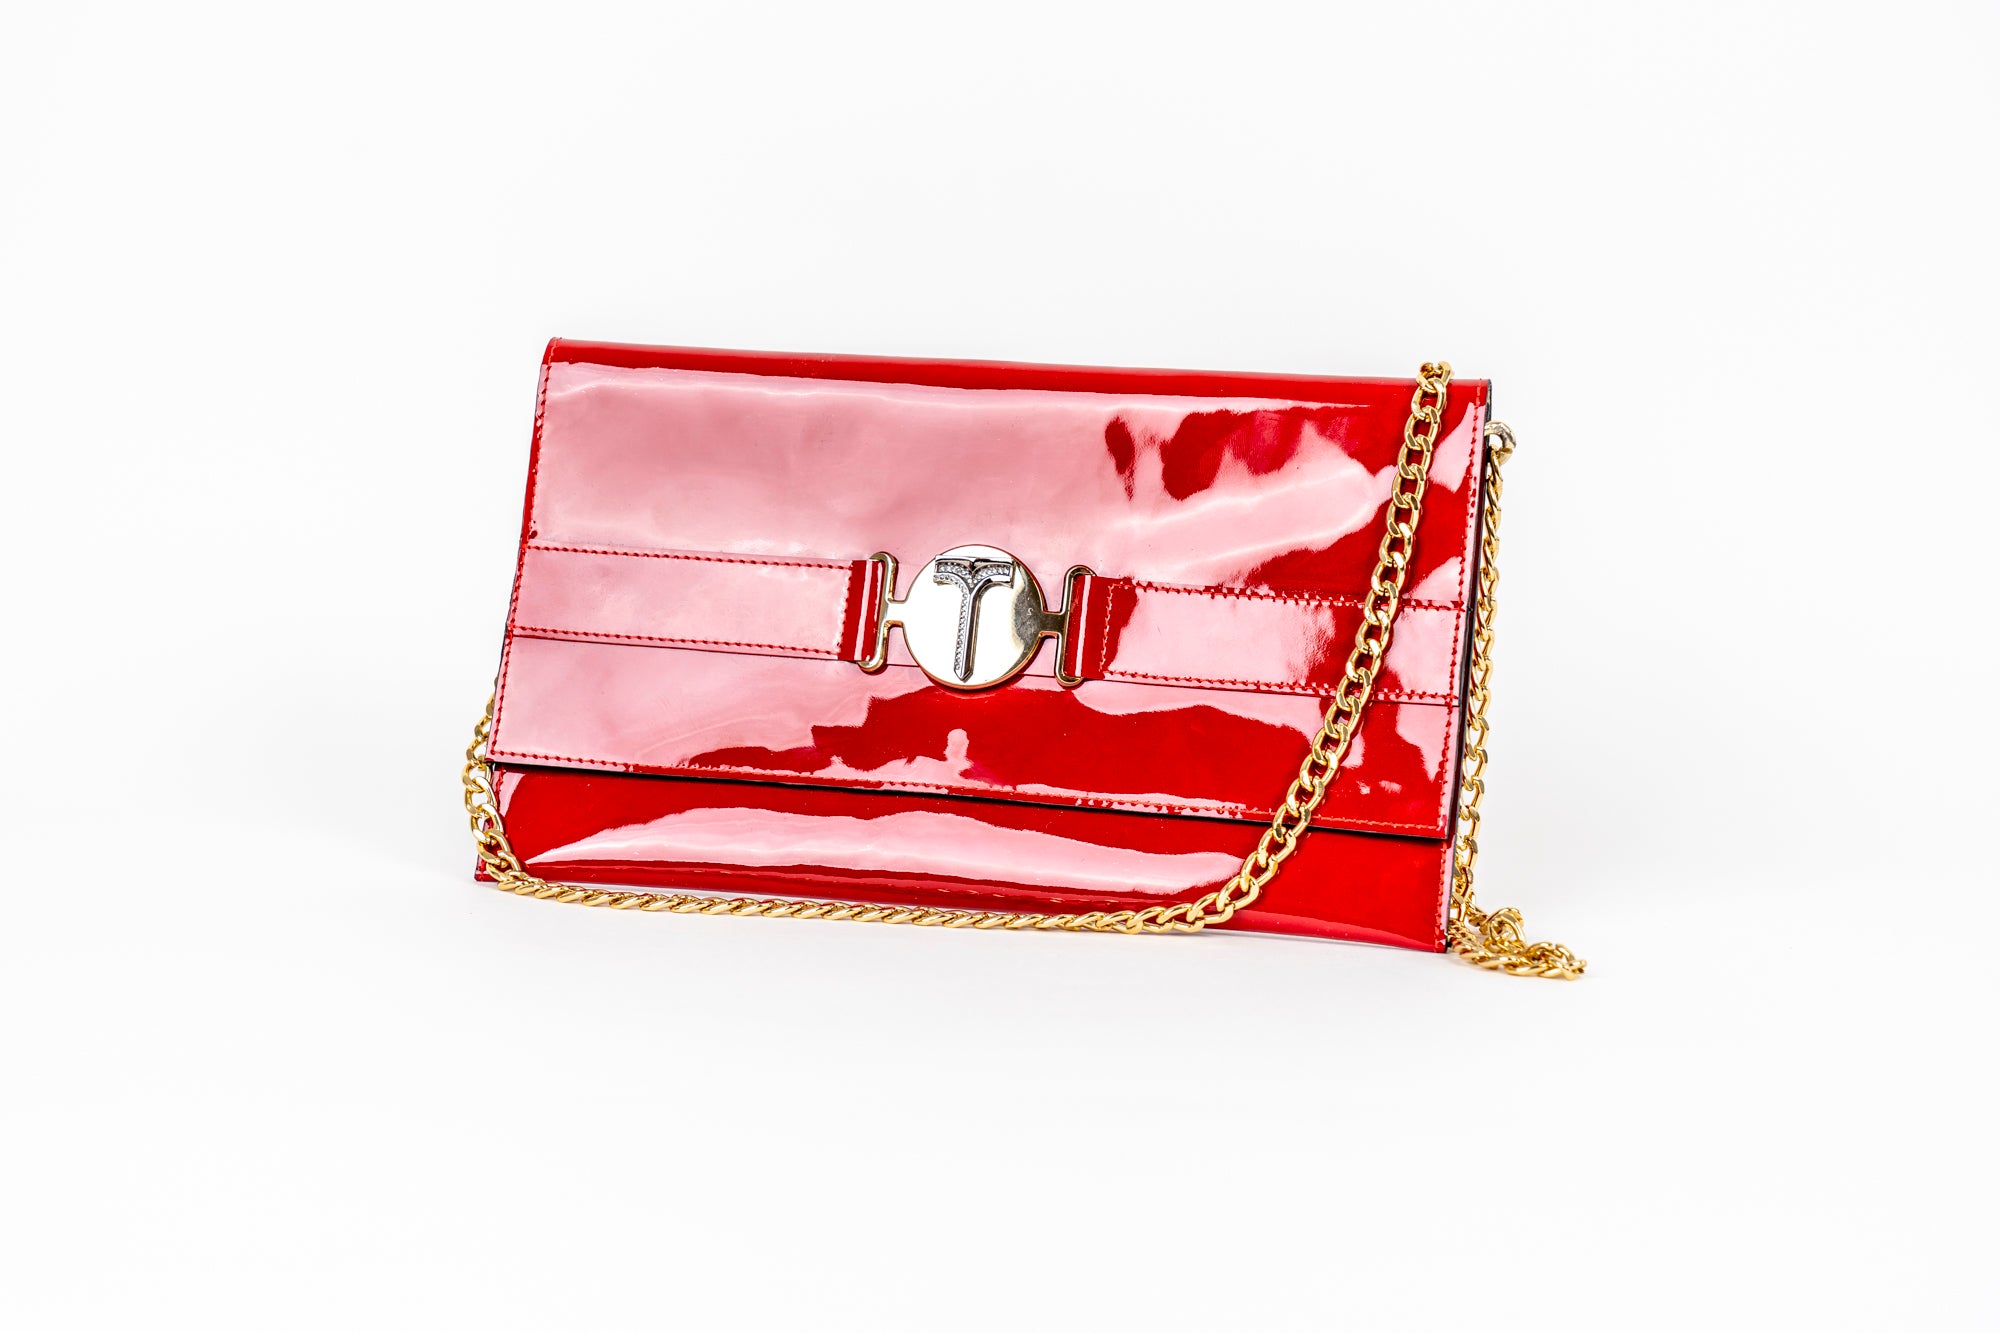 BORSA IN VERNICE Red/ Red patent leather bag